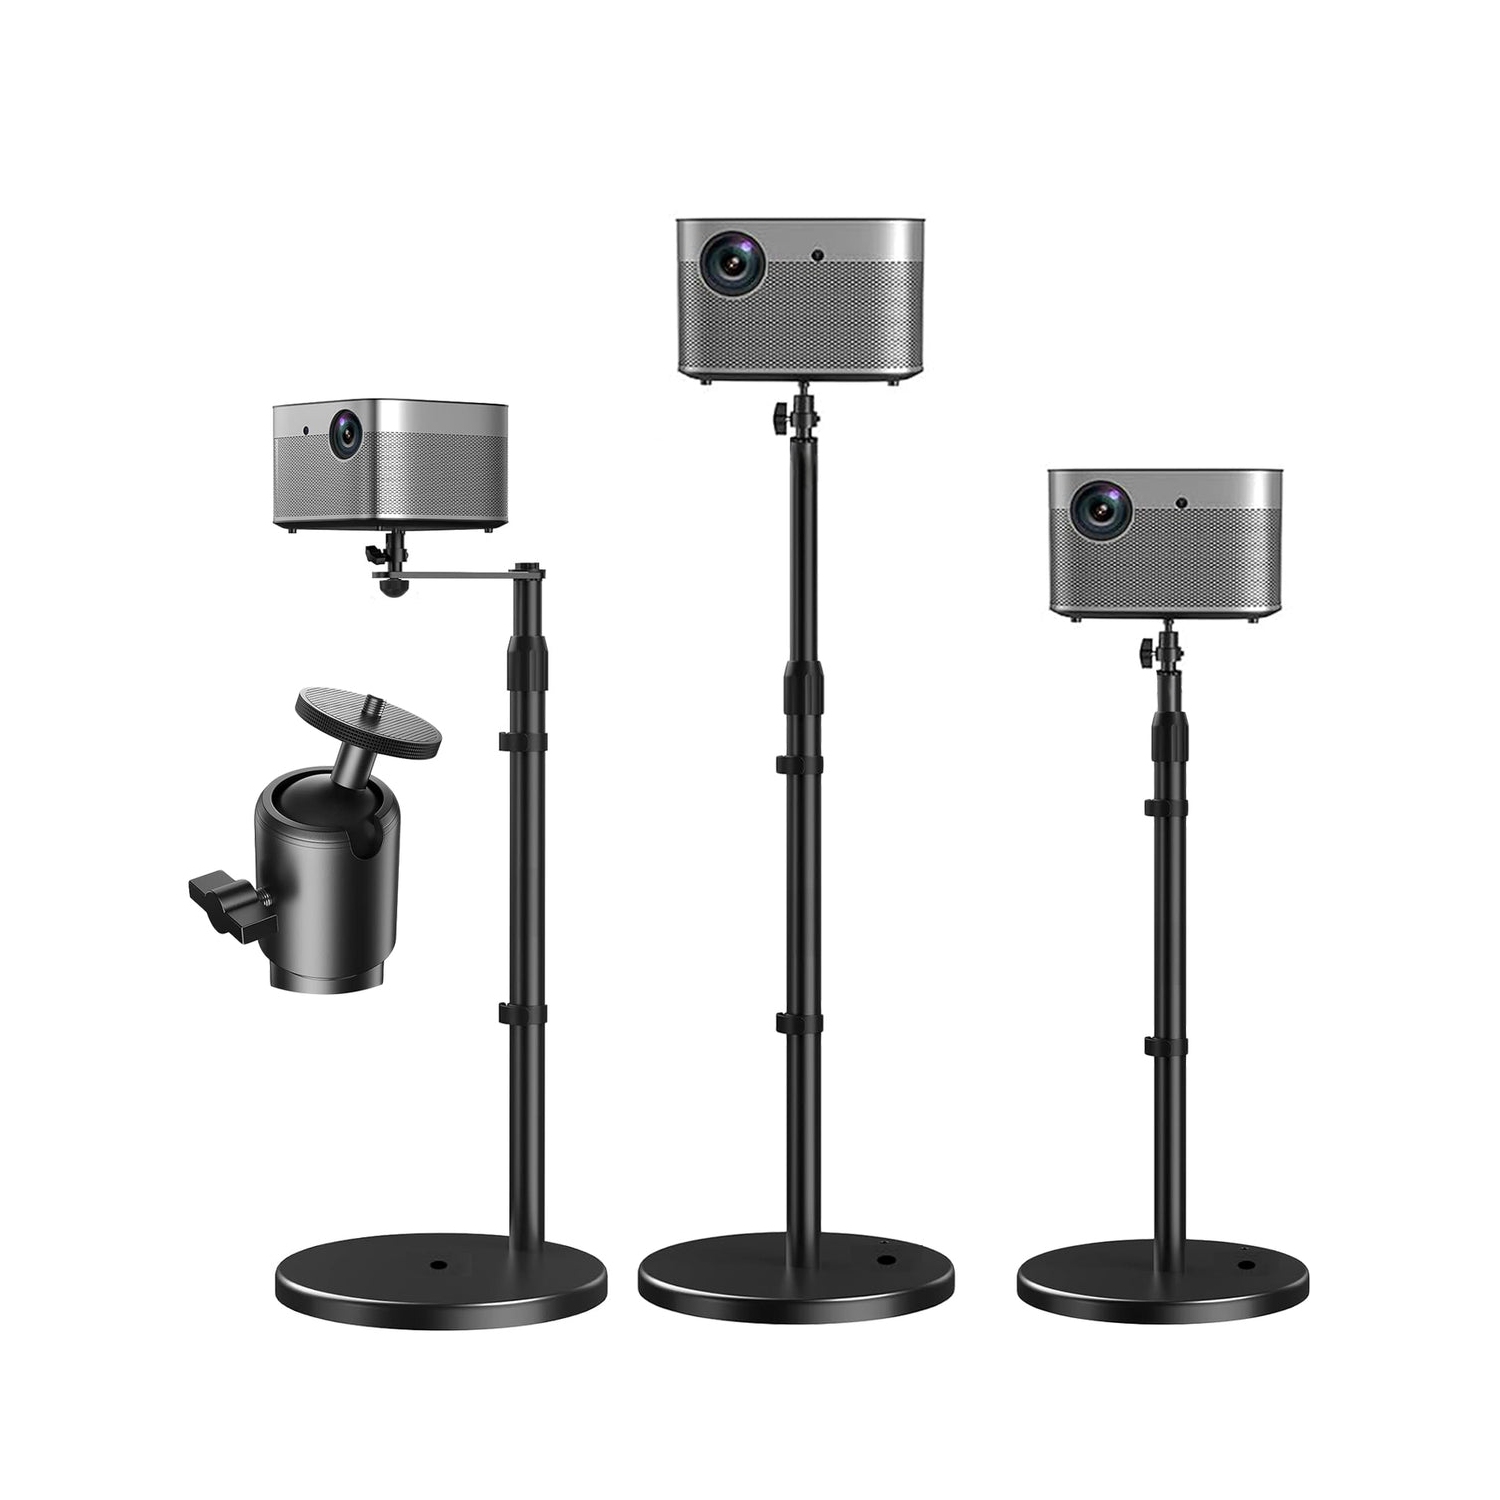 Projector Stand Height adjustable 28"-52" Tall Floor Stands w 3 Mounting Options 360° Rotatable Ball Head Heavy Duty Multipurpose Soporte Para Proyector for Home Office Outdoor